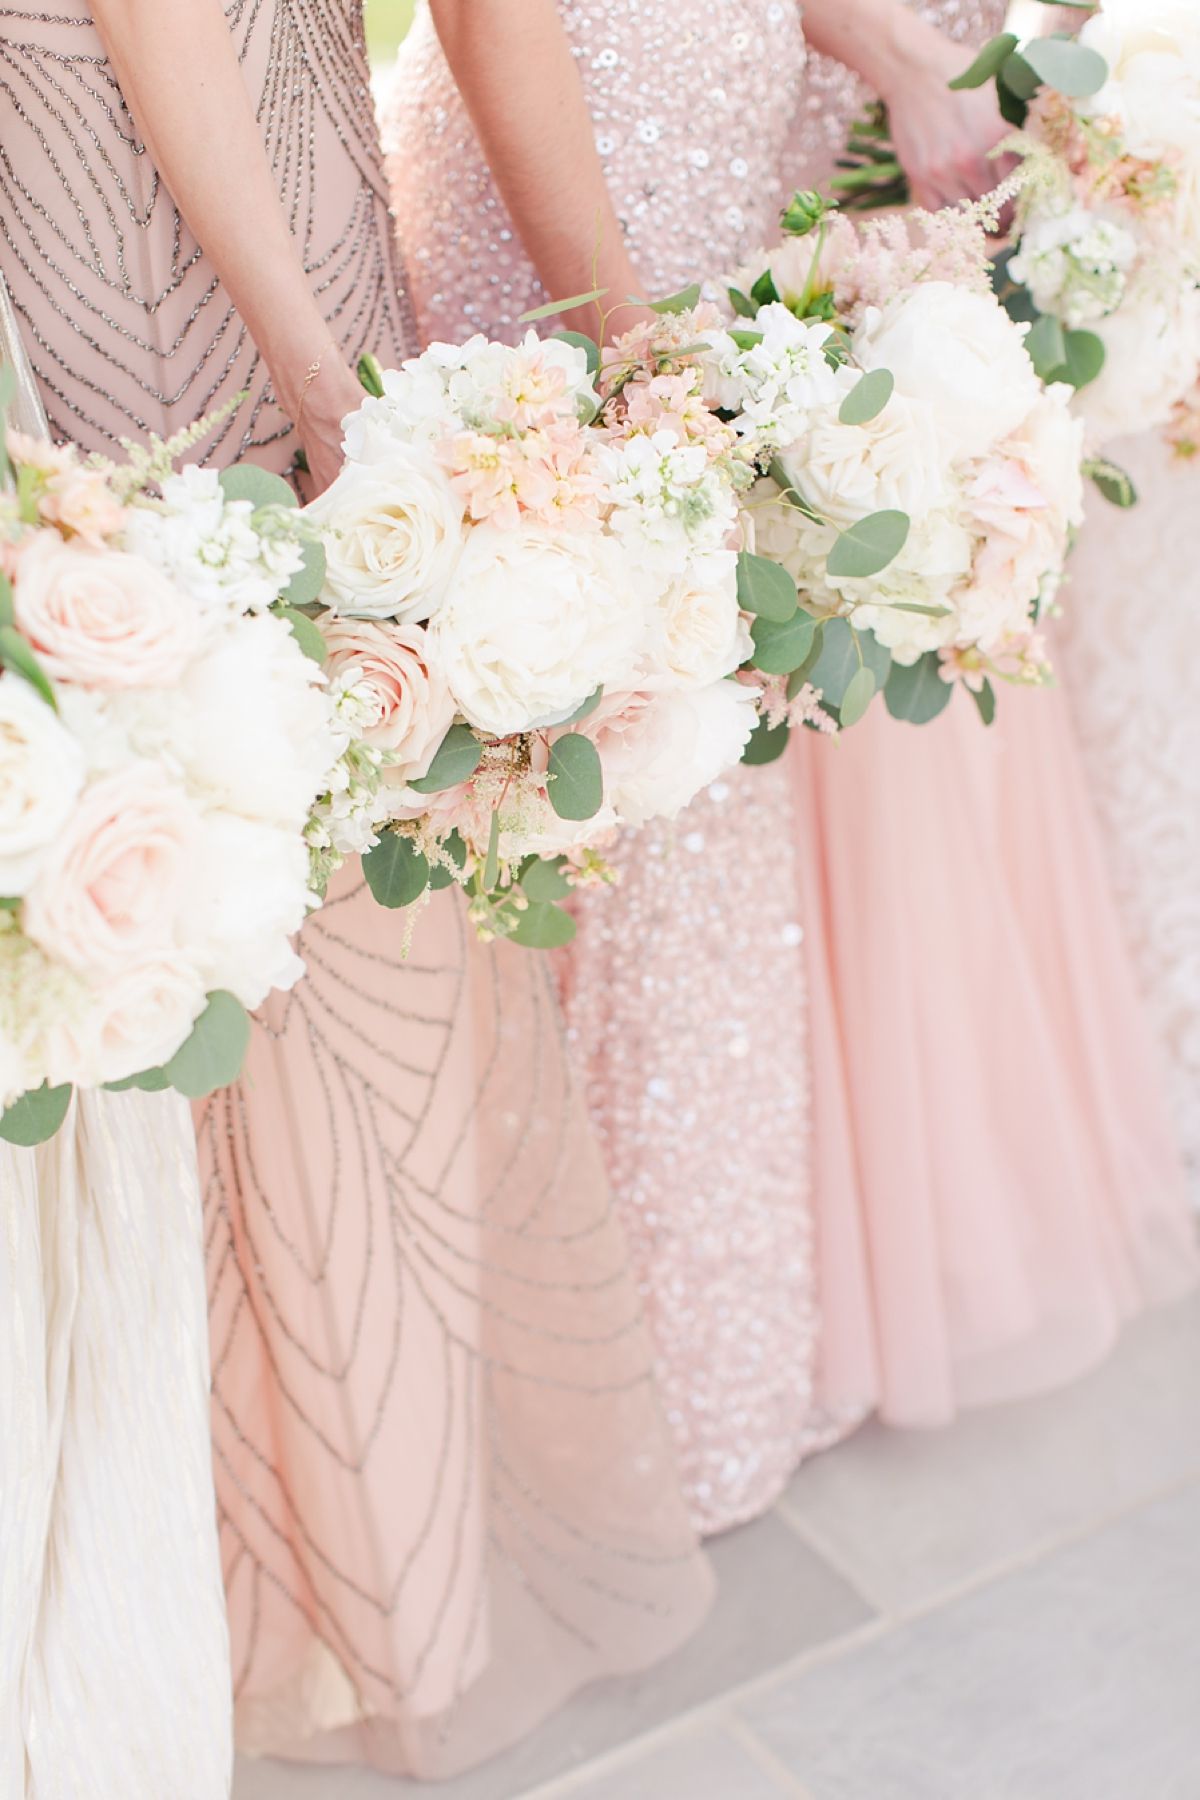 Amazing Spring Wedding Bouquets Ideas You Will Love